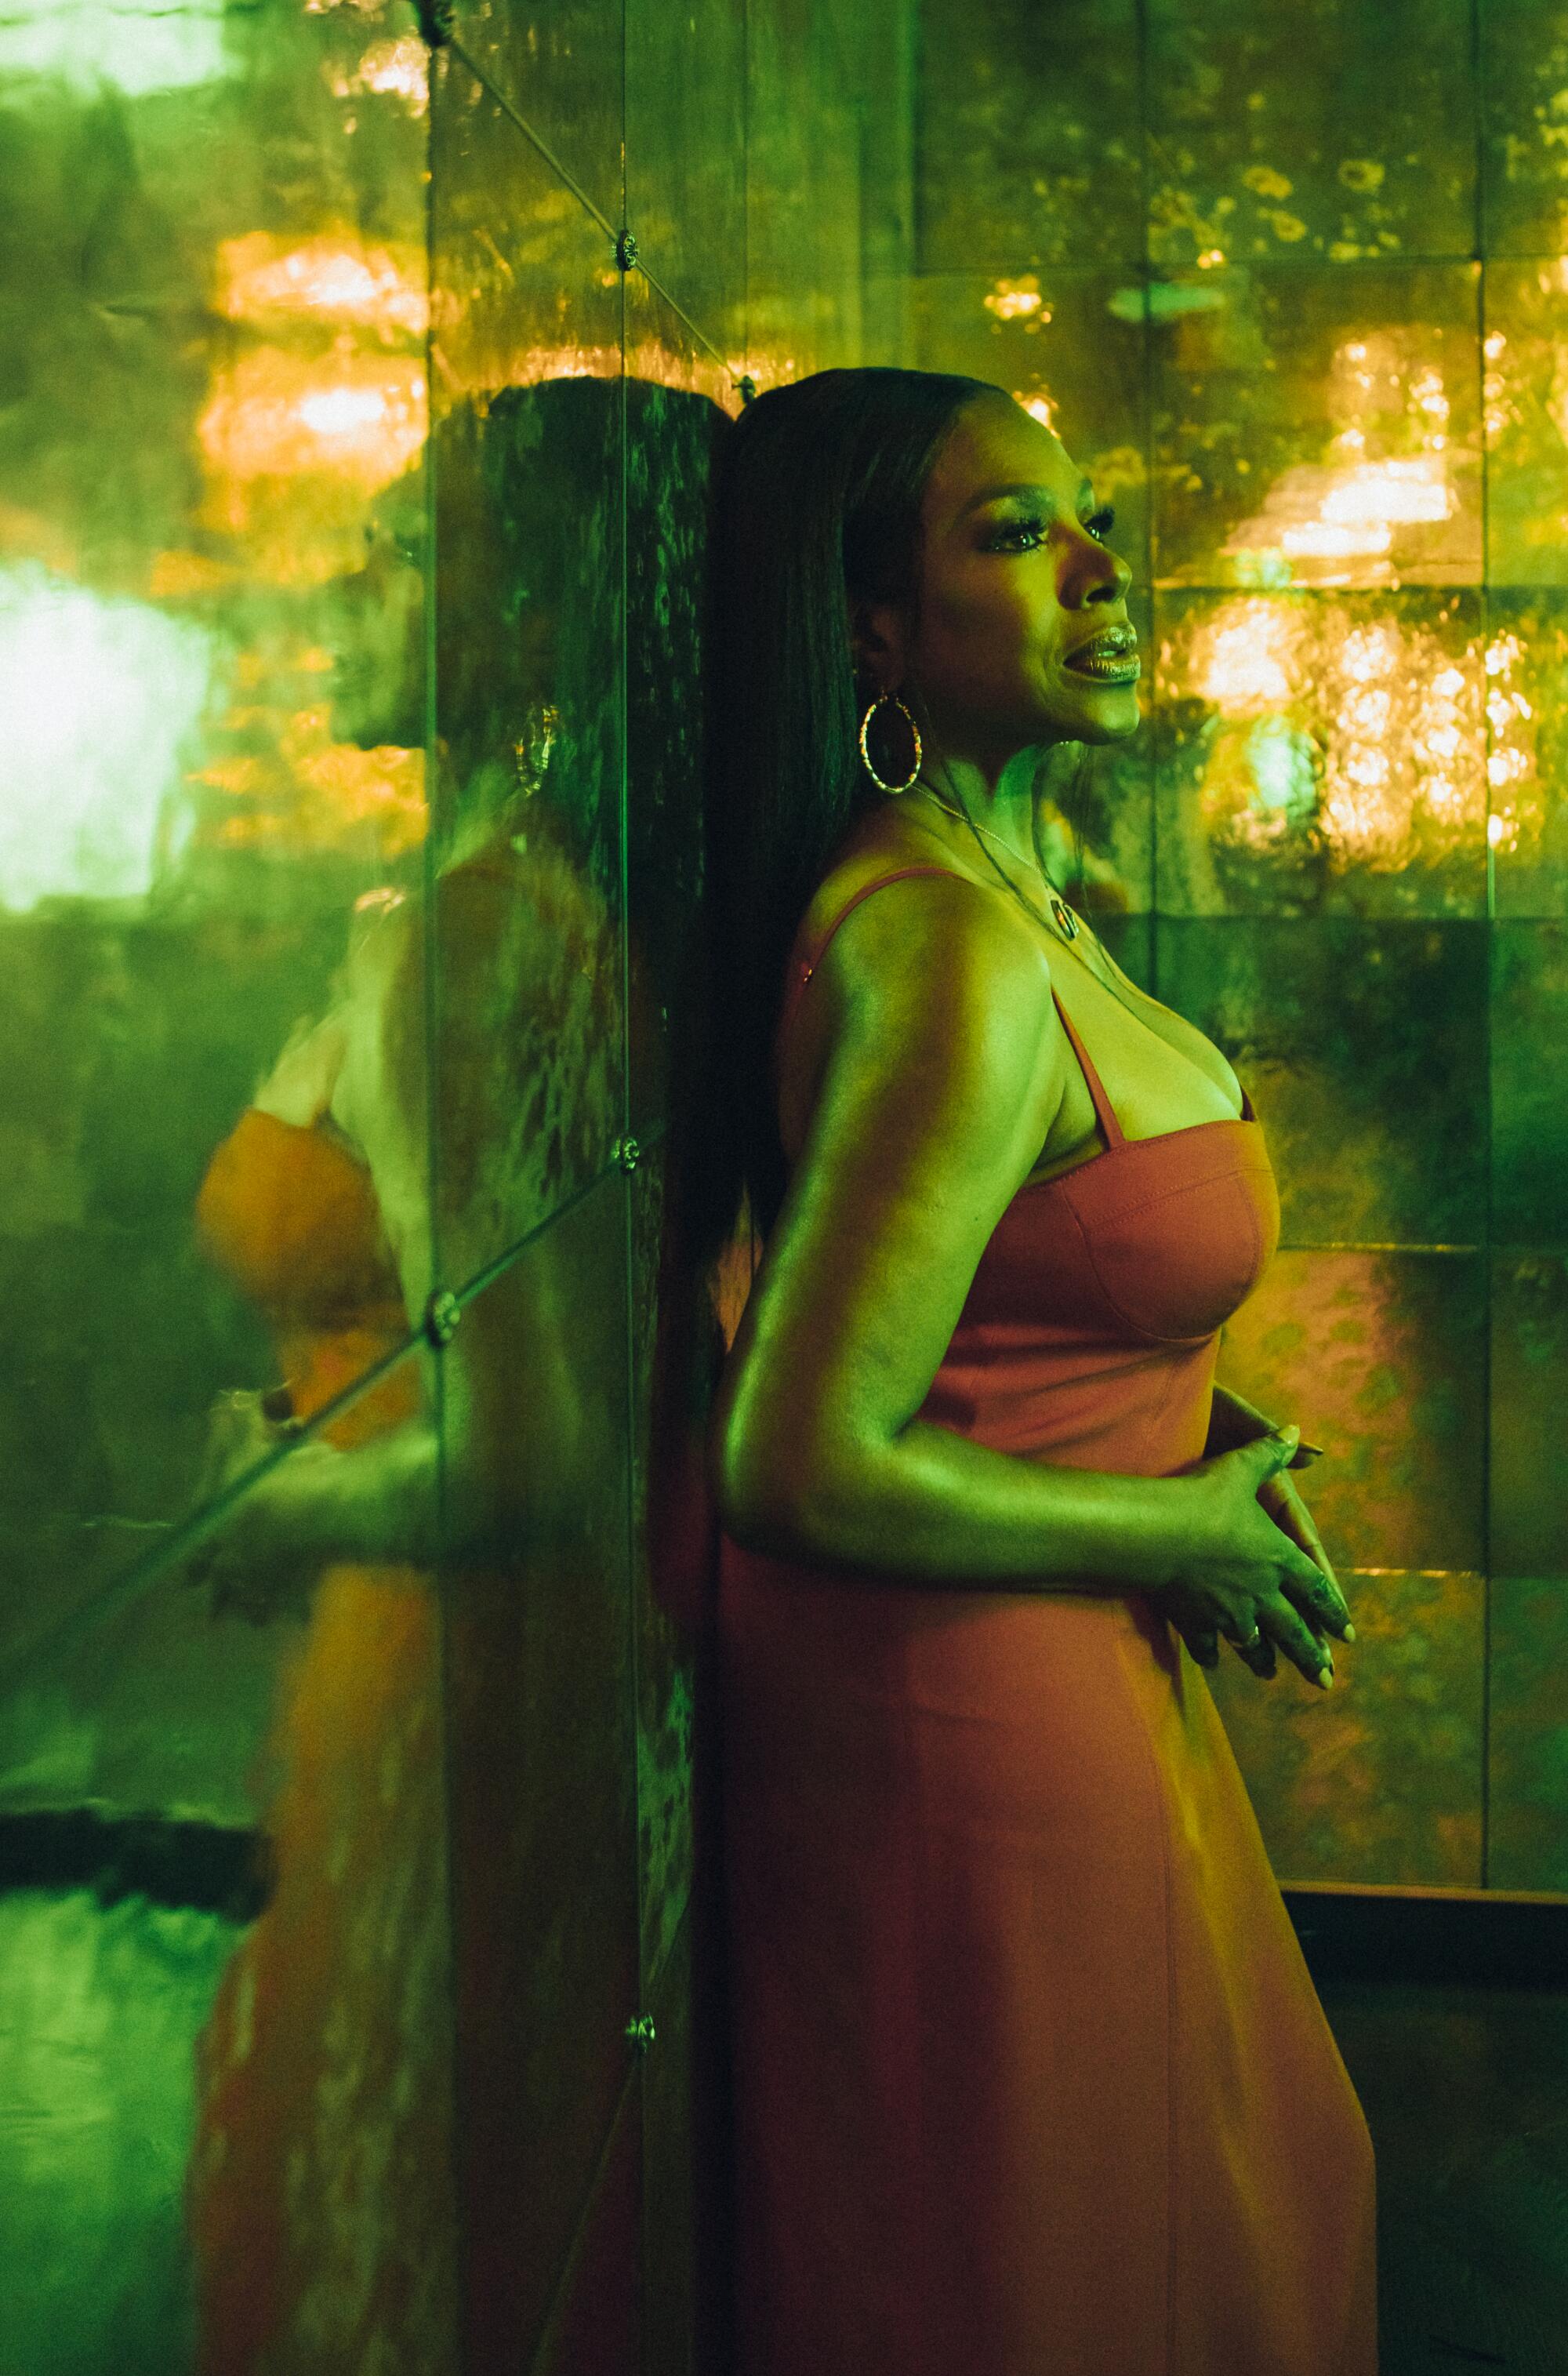  A woman in a red dress stands against a mirrored wall, back to back with her own reflection.